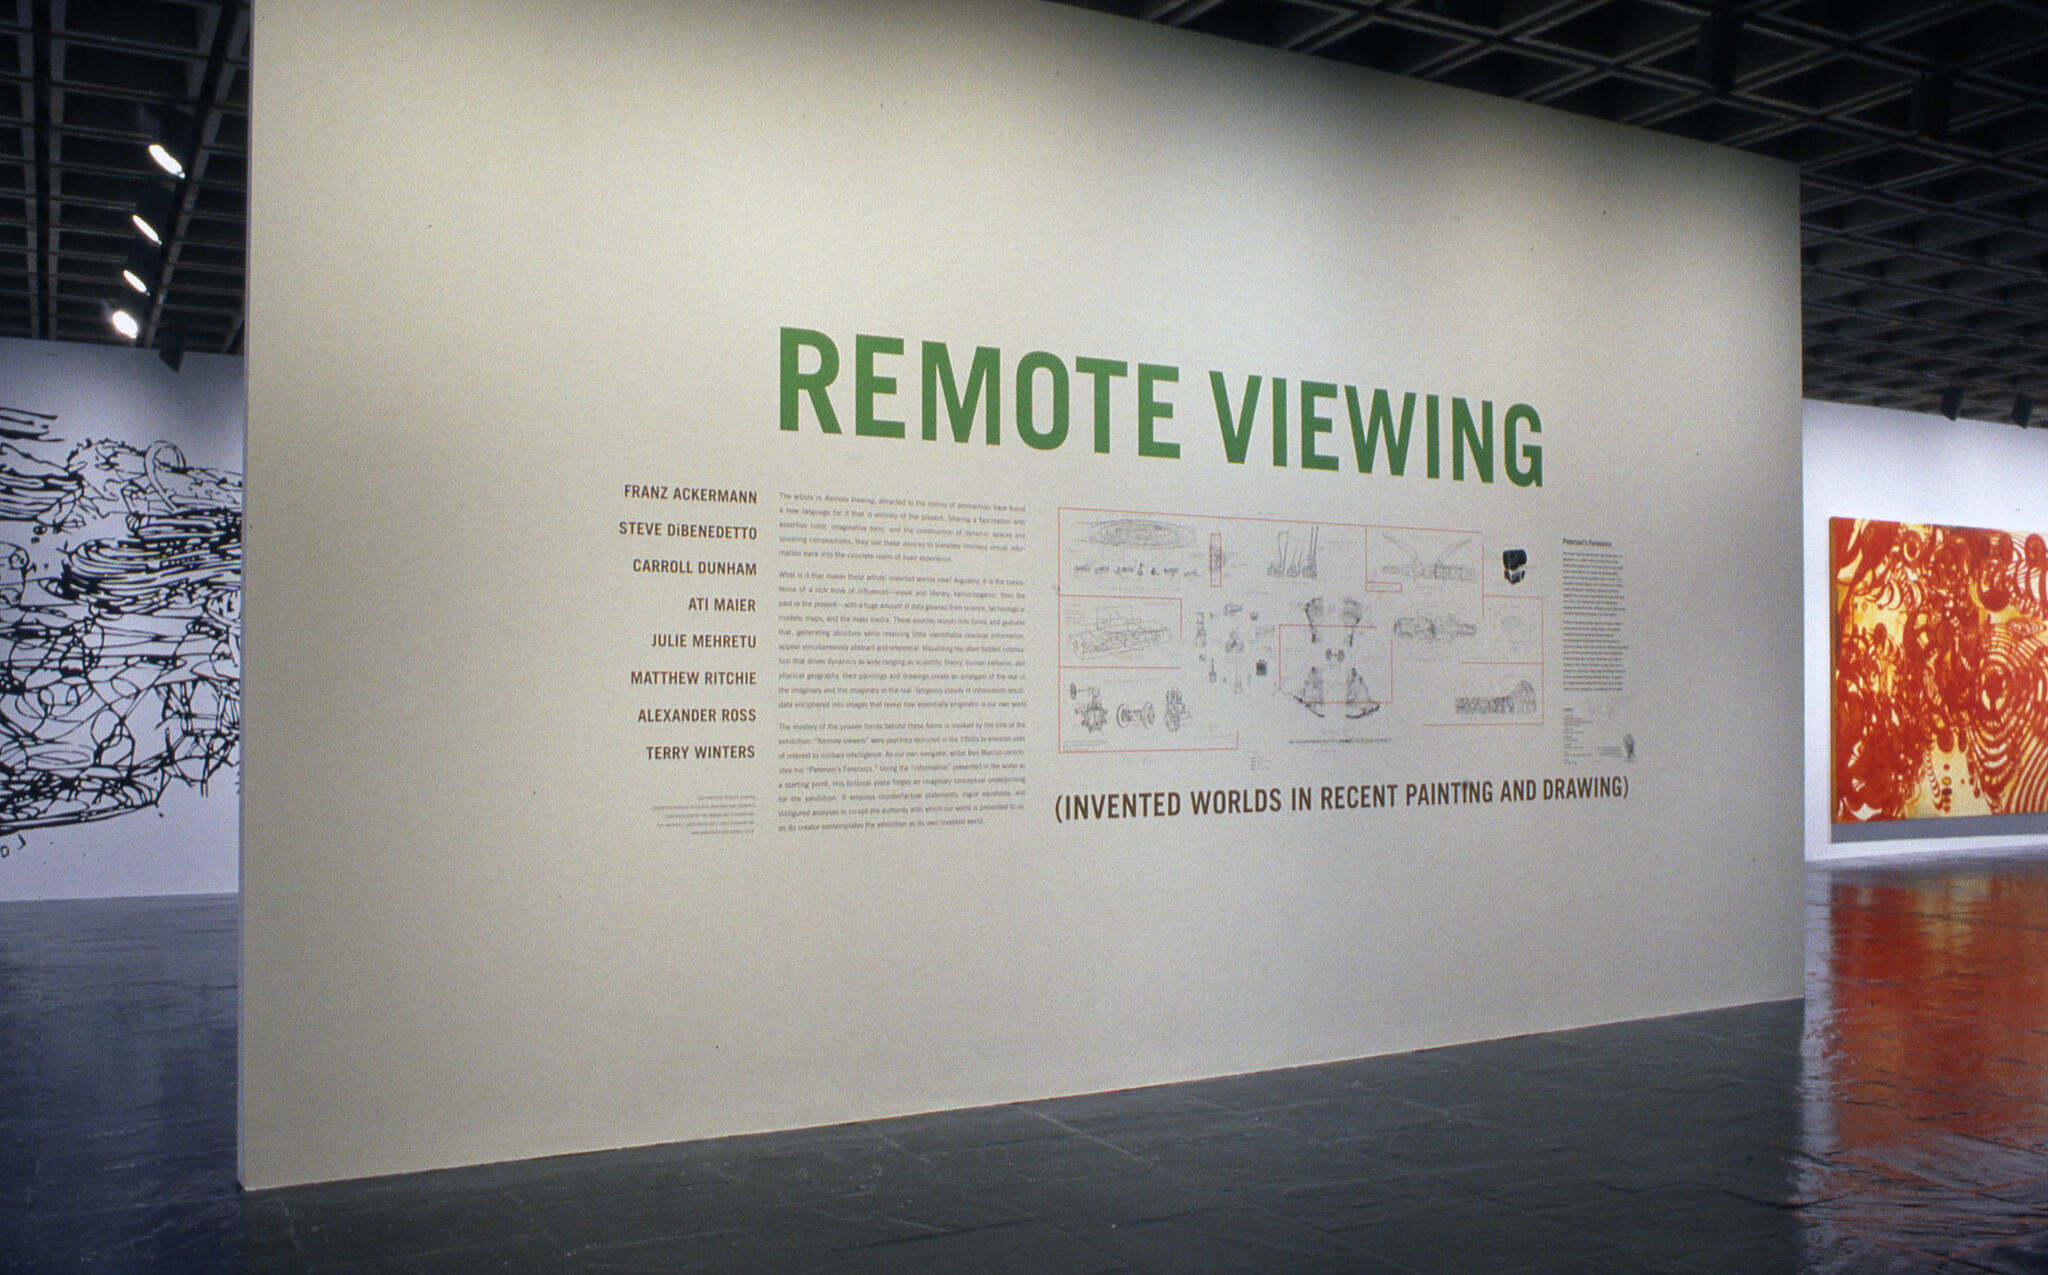 Wall text for Remote Viewing (Invented Worlds in Recent Painting and Drawing).